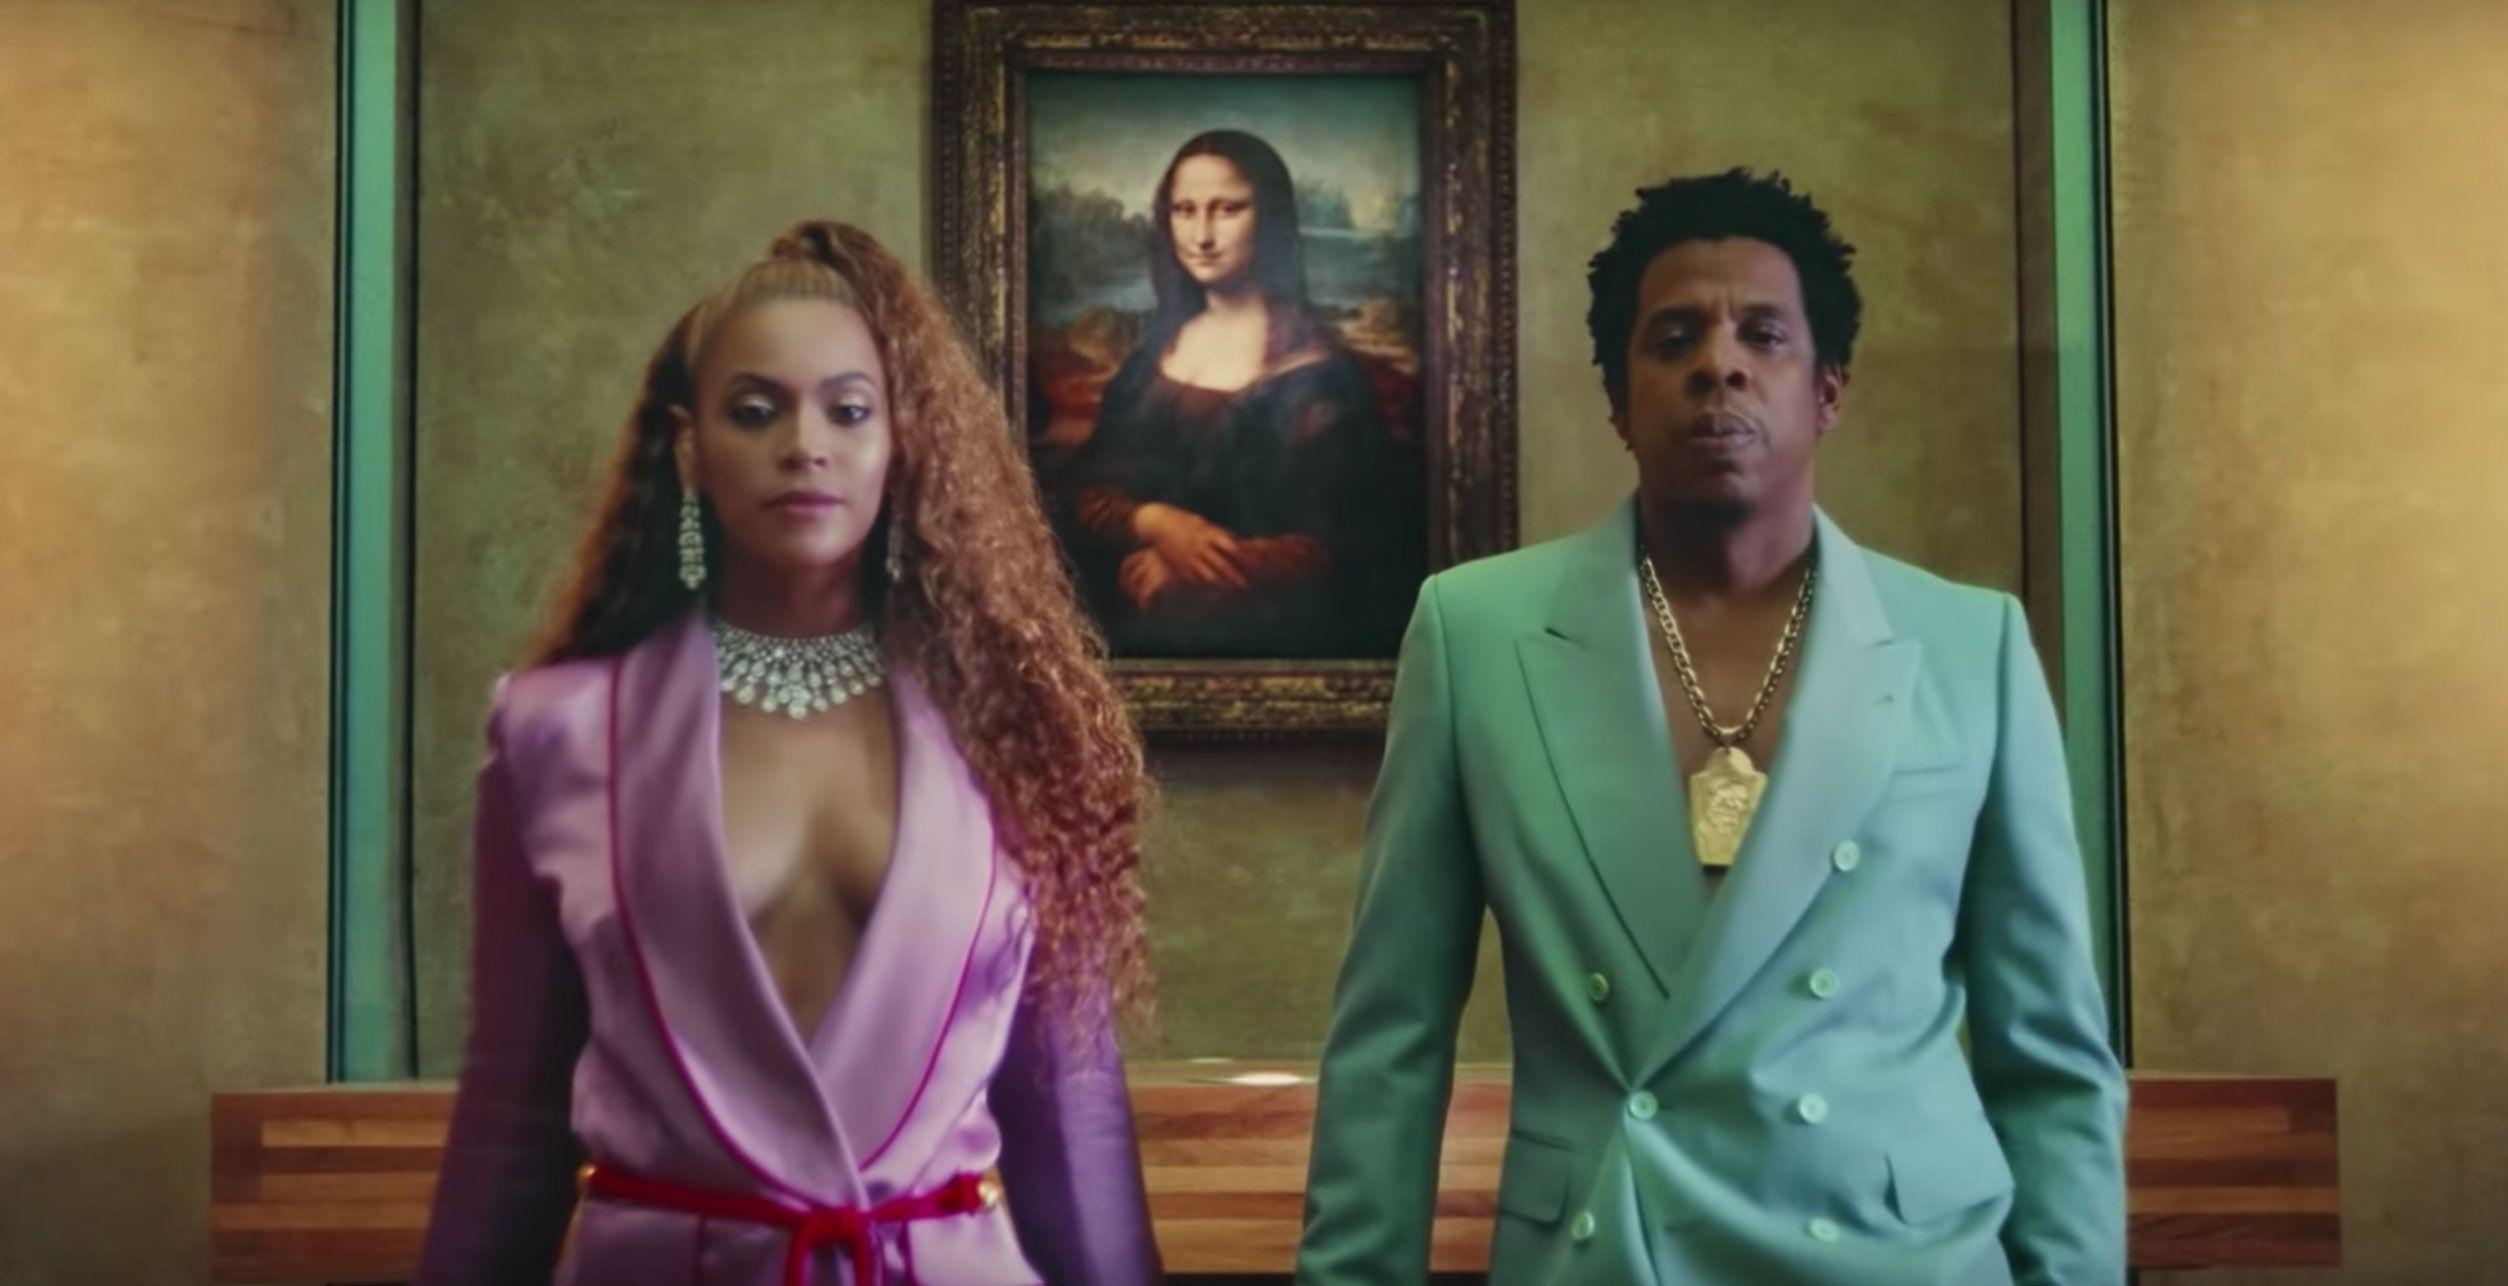 How Beyonce, Jay Z Defy Western Art Tradition In 'Apeshit' Video